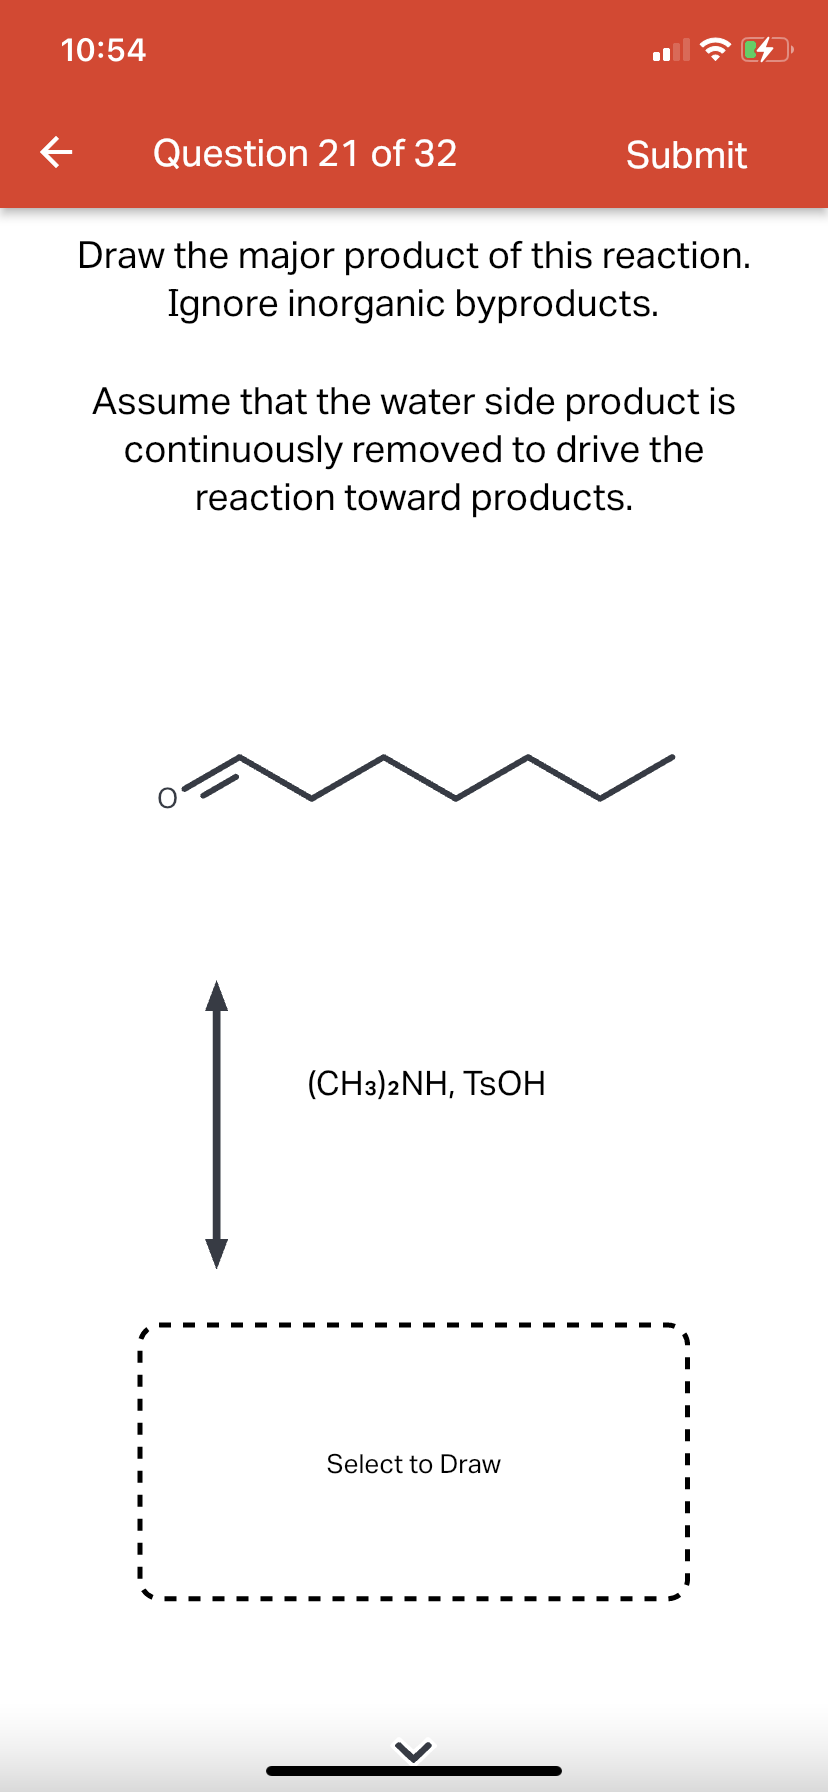 10:54
←
Question 21 of 32
Draw the major product of this reaction.
Ignore inorganic byproducts.
Submit
Assume that the water side product is
continuously removed to drive the
reaction toward products.
(CH3)2NH, TSOH
Select to Draw
|
I
I